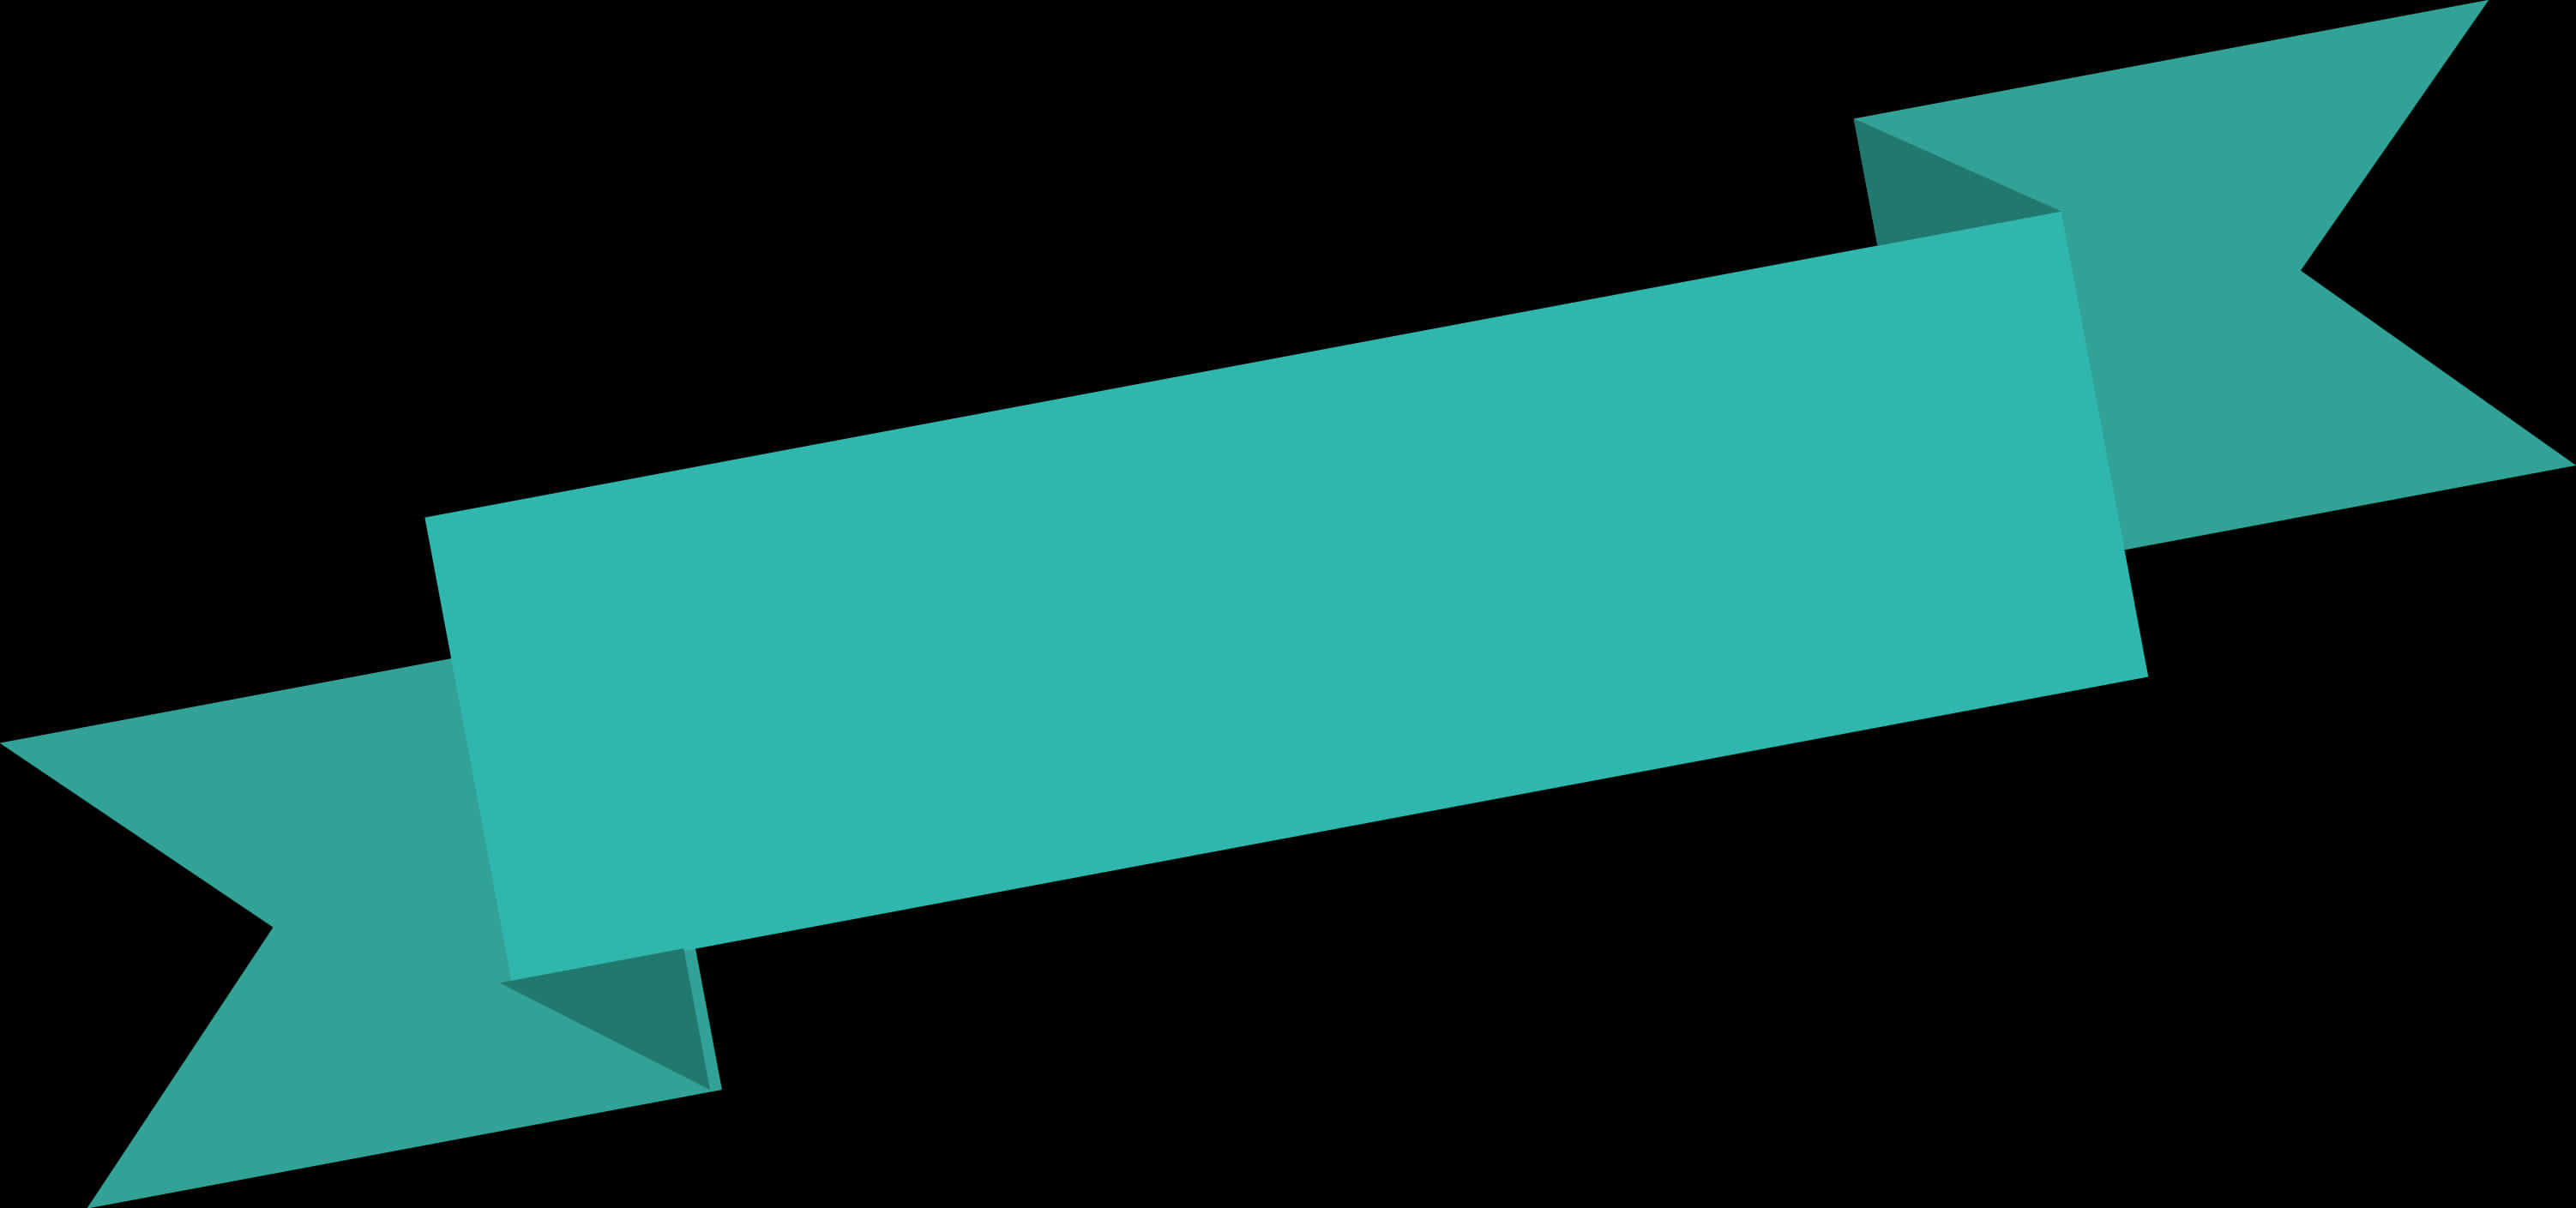 Teal Banner Ribbon Graphic PNG image